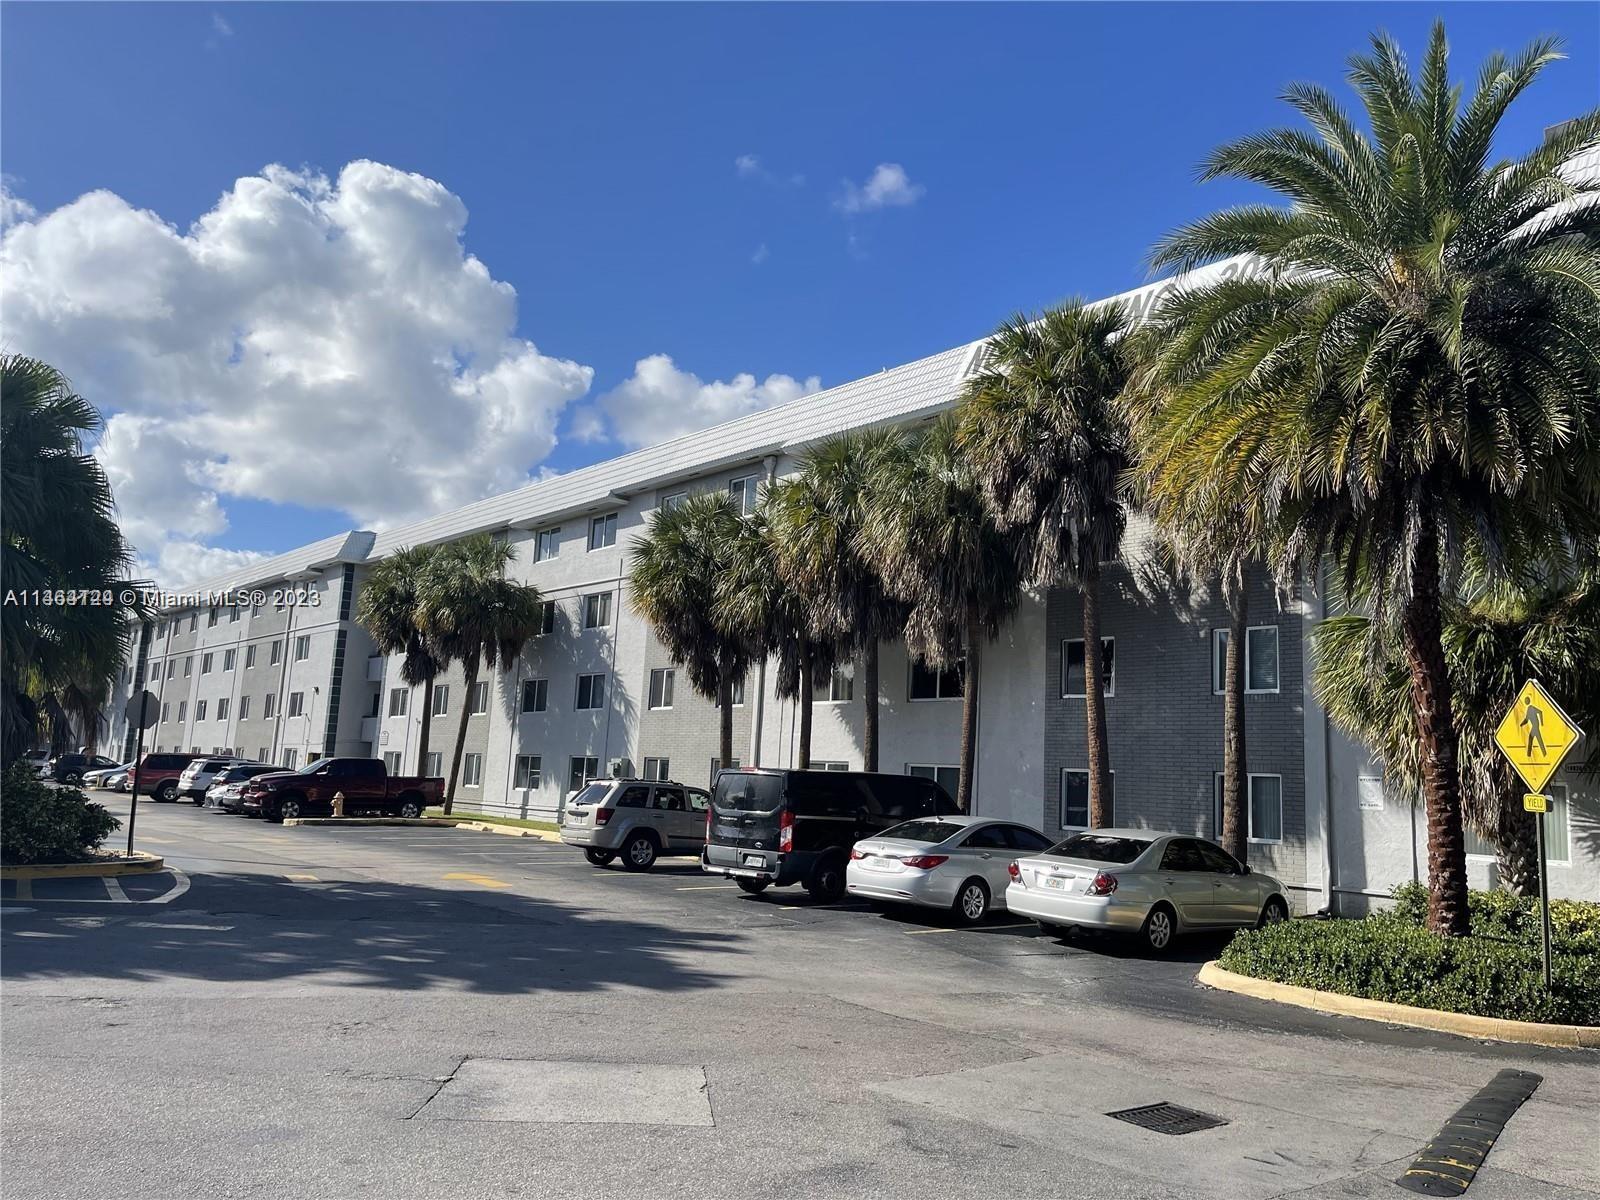 10900 SW 196th St 367, Cutler Bay, Florida 33157, 1 Bedroom Bedrooms, ,1 BathroomBathrooms,Residentiallease,For Rent,10900 SW 196th St 367,A11464124